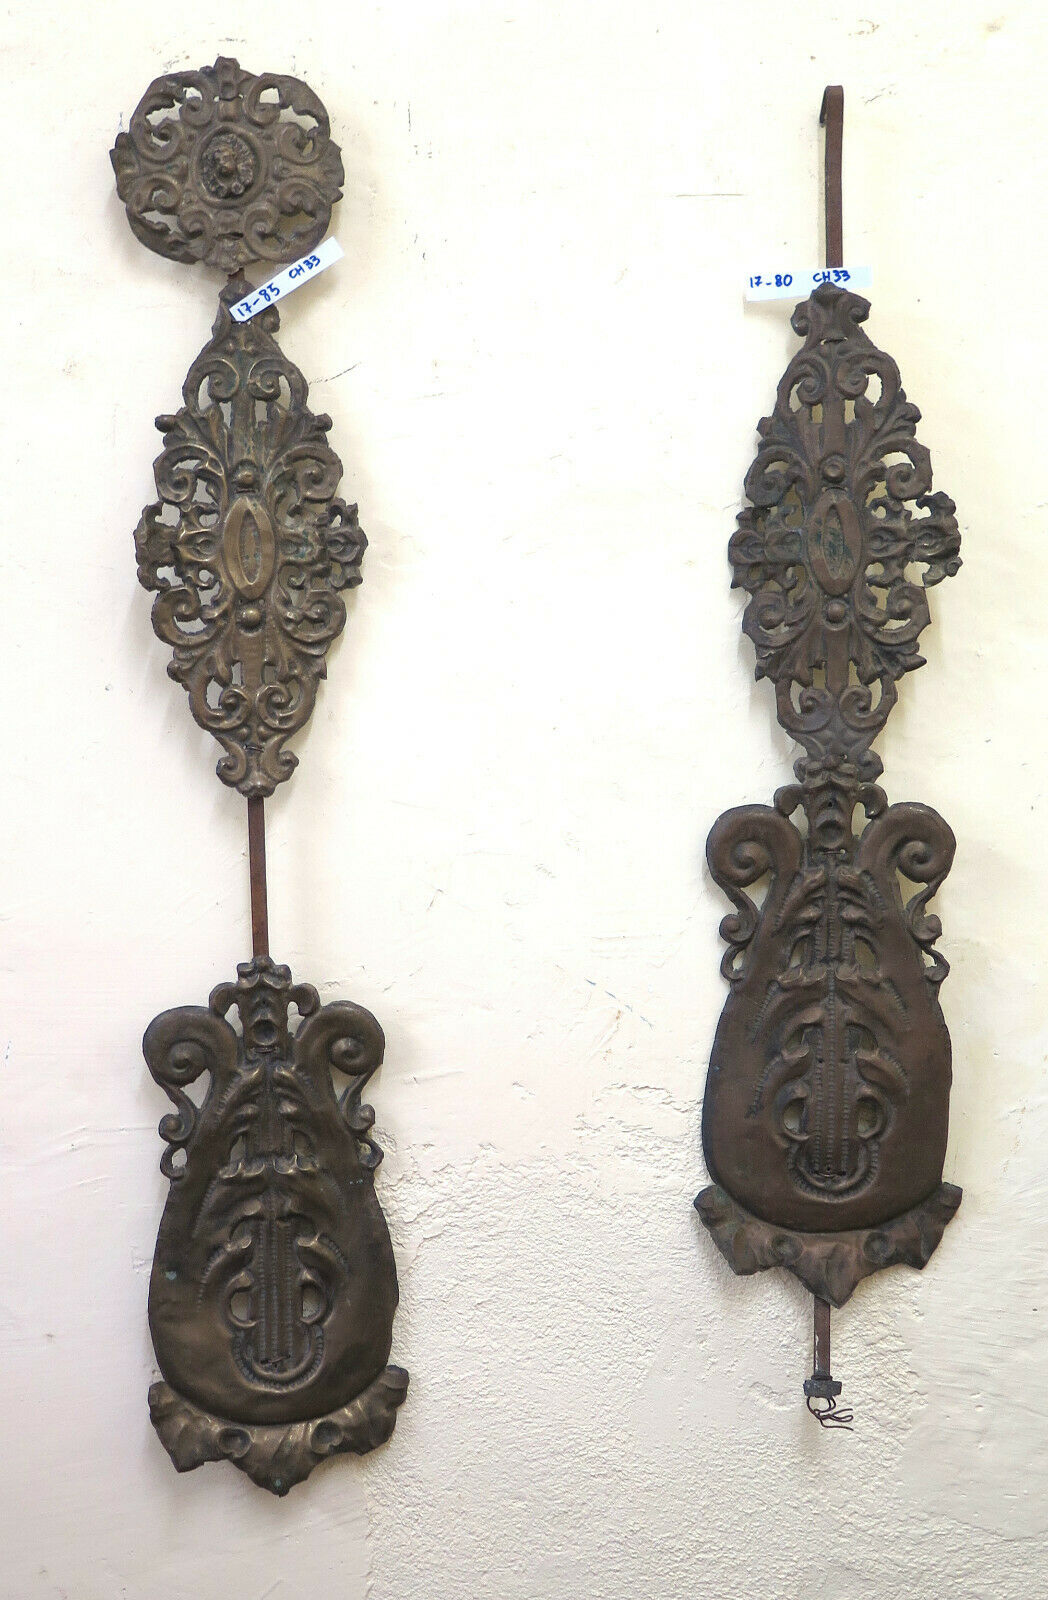 TWO ANCIENT EMBOSSED IRON FRIES WALL DECORATION FRIEZE CH33 